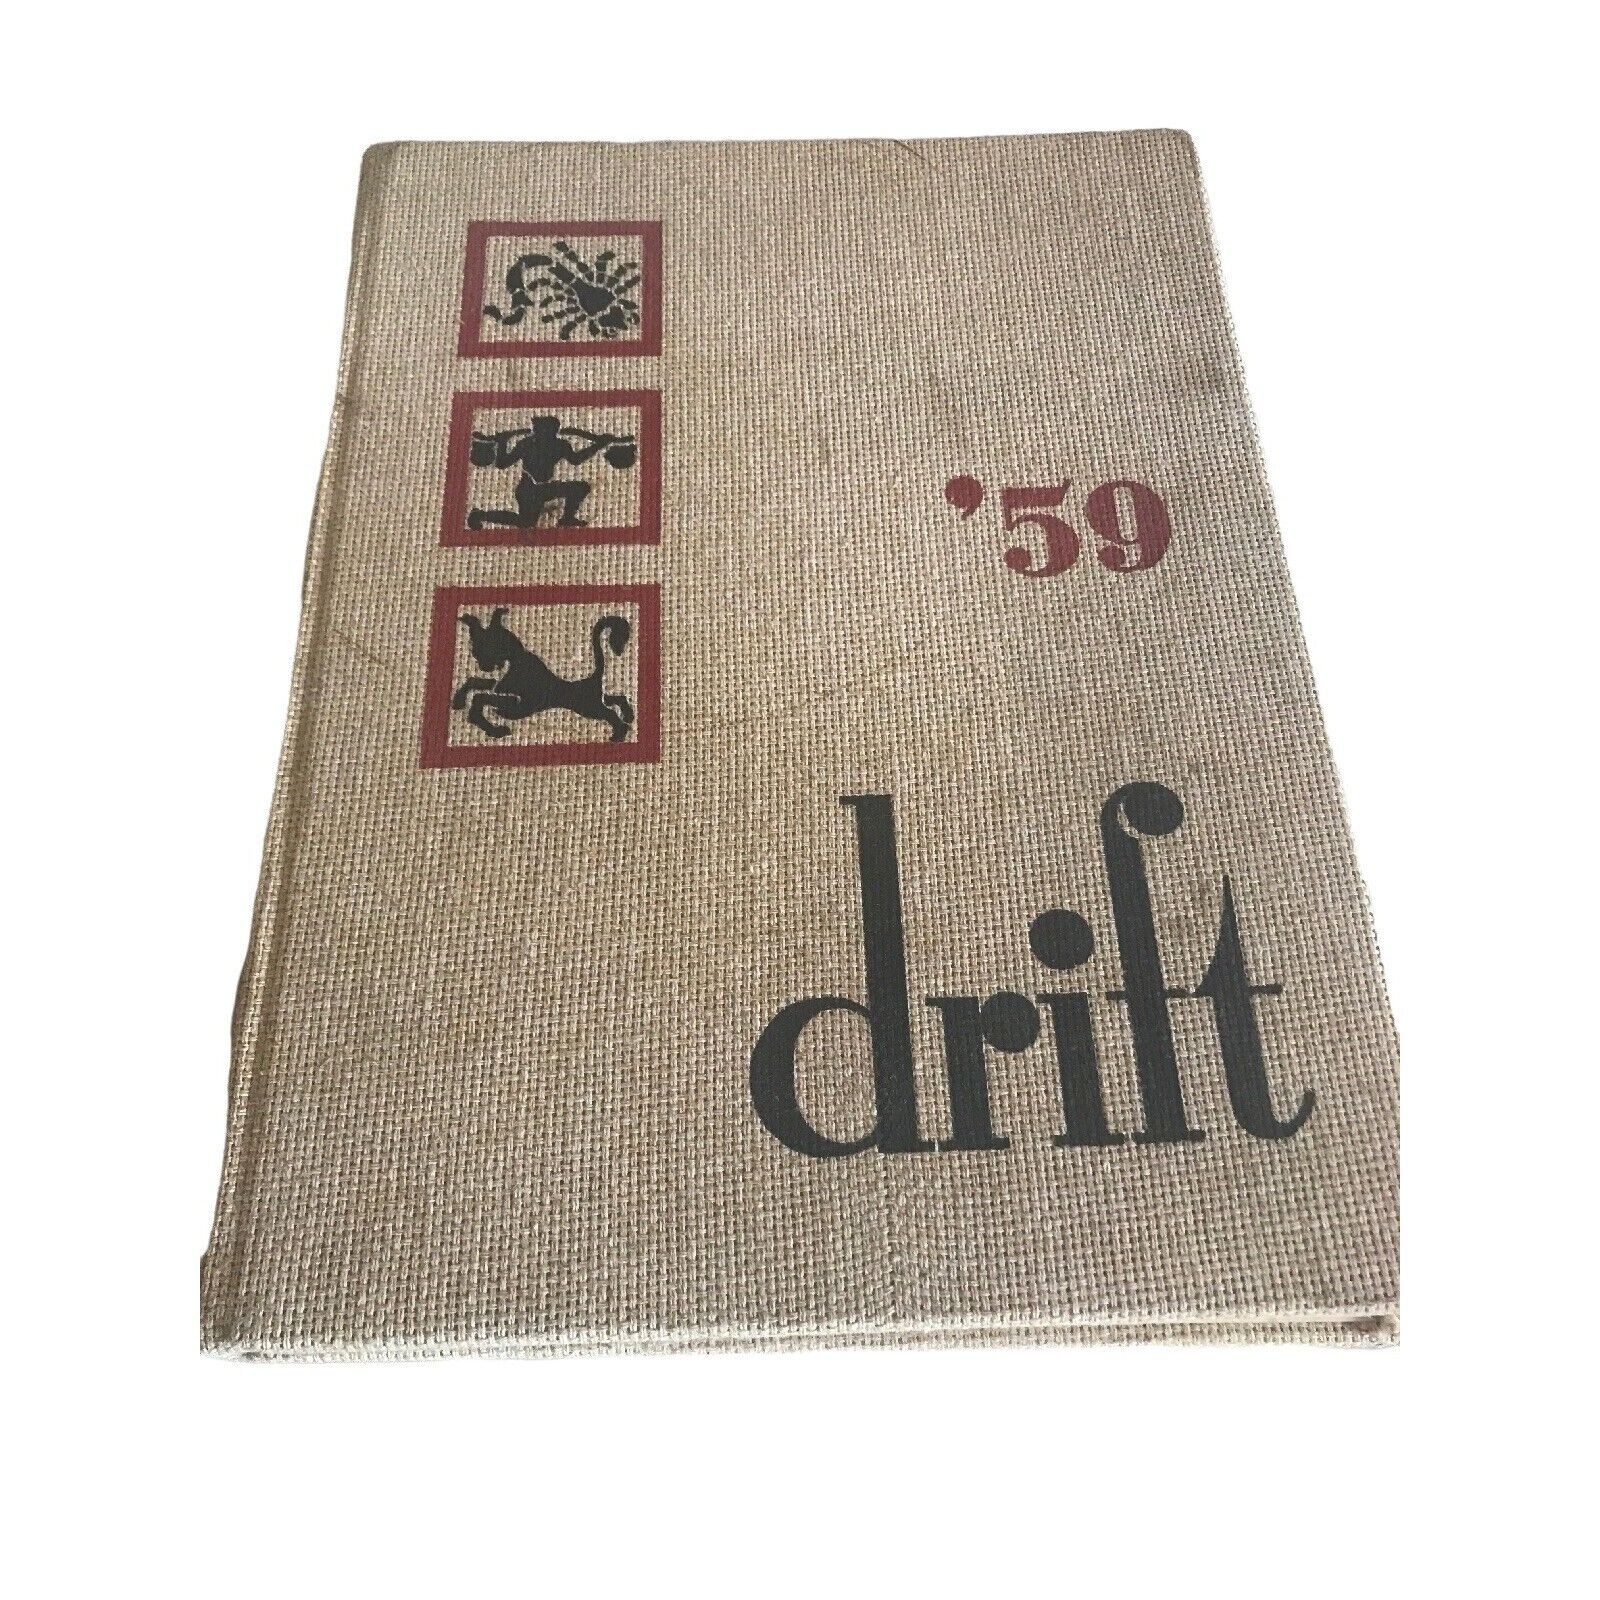 1959 The Drift Butler University Yearbook Hinkle Basketball Indianapolis